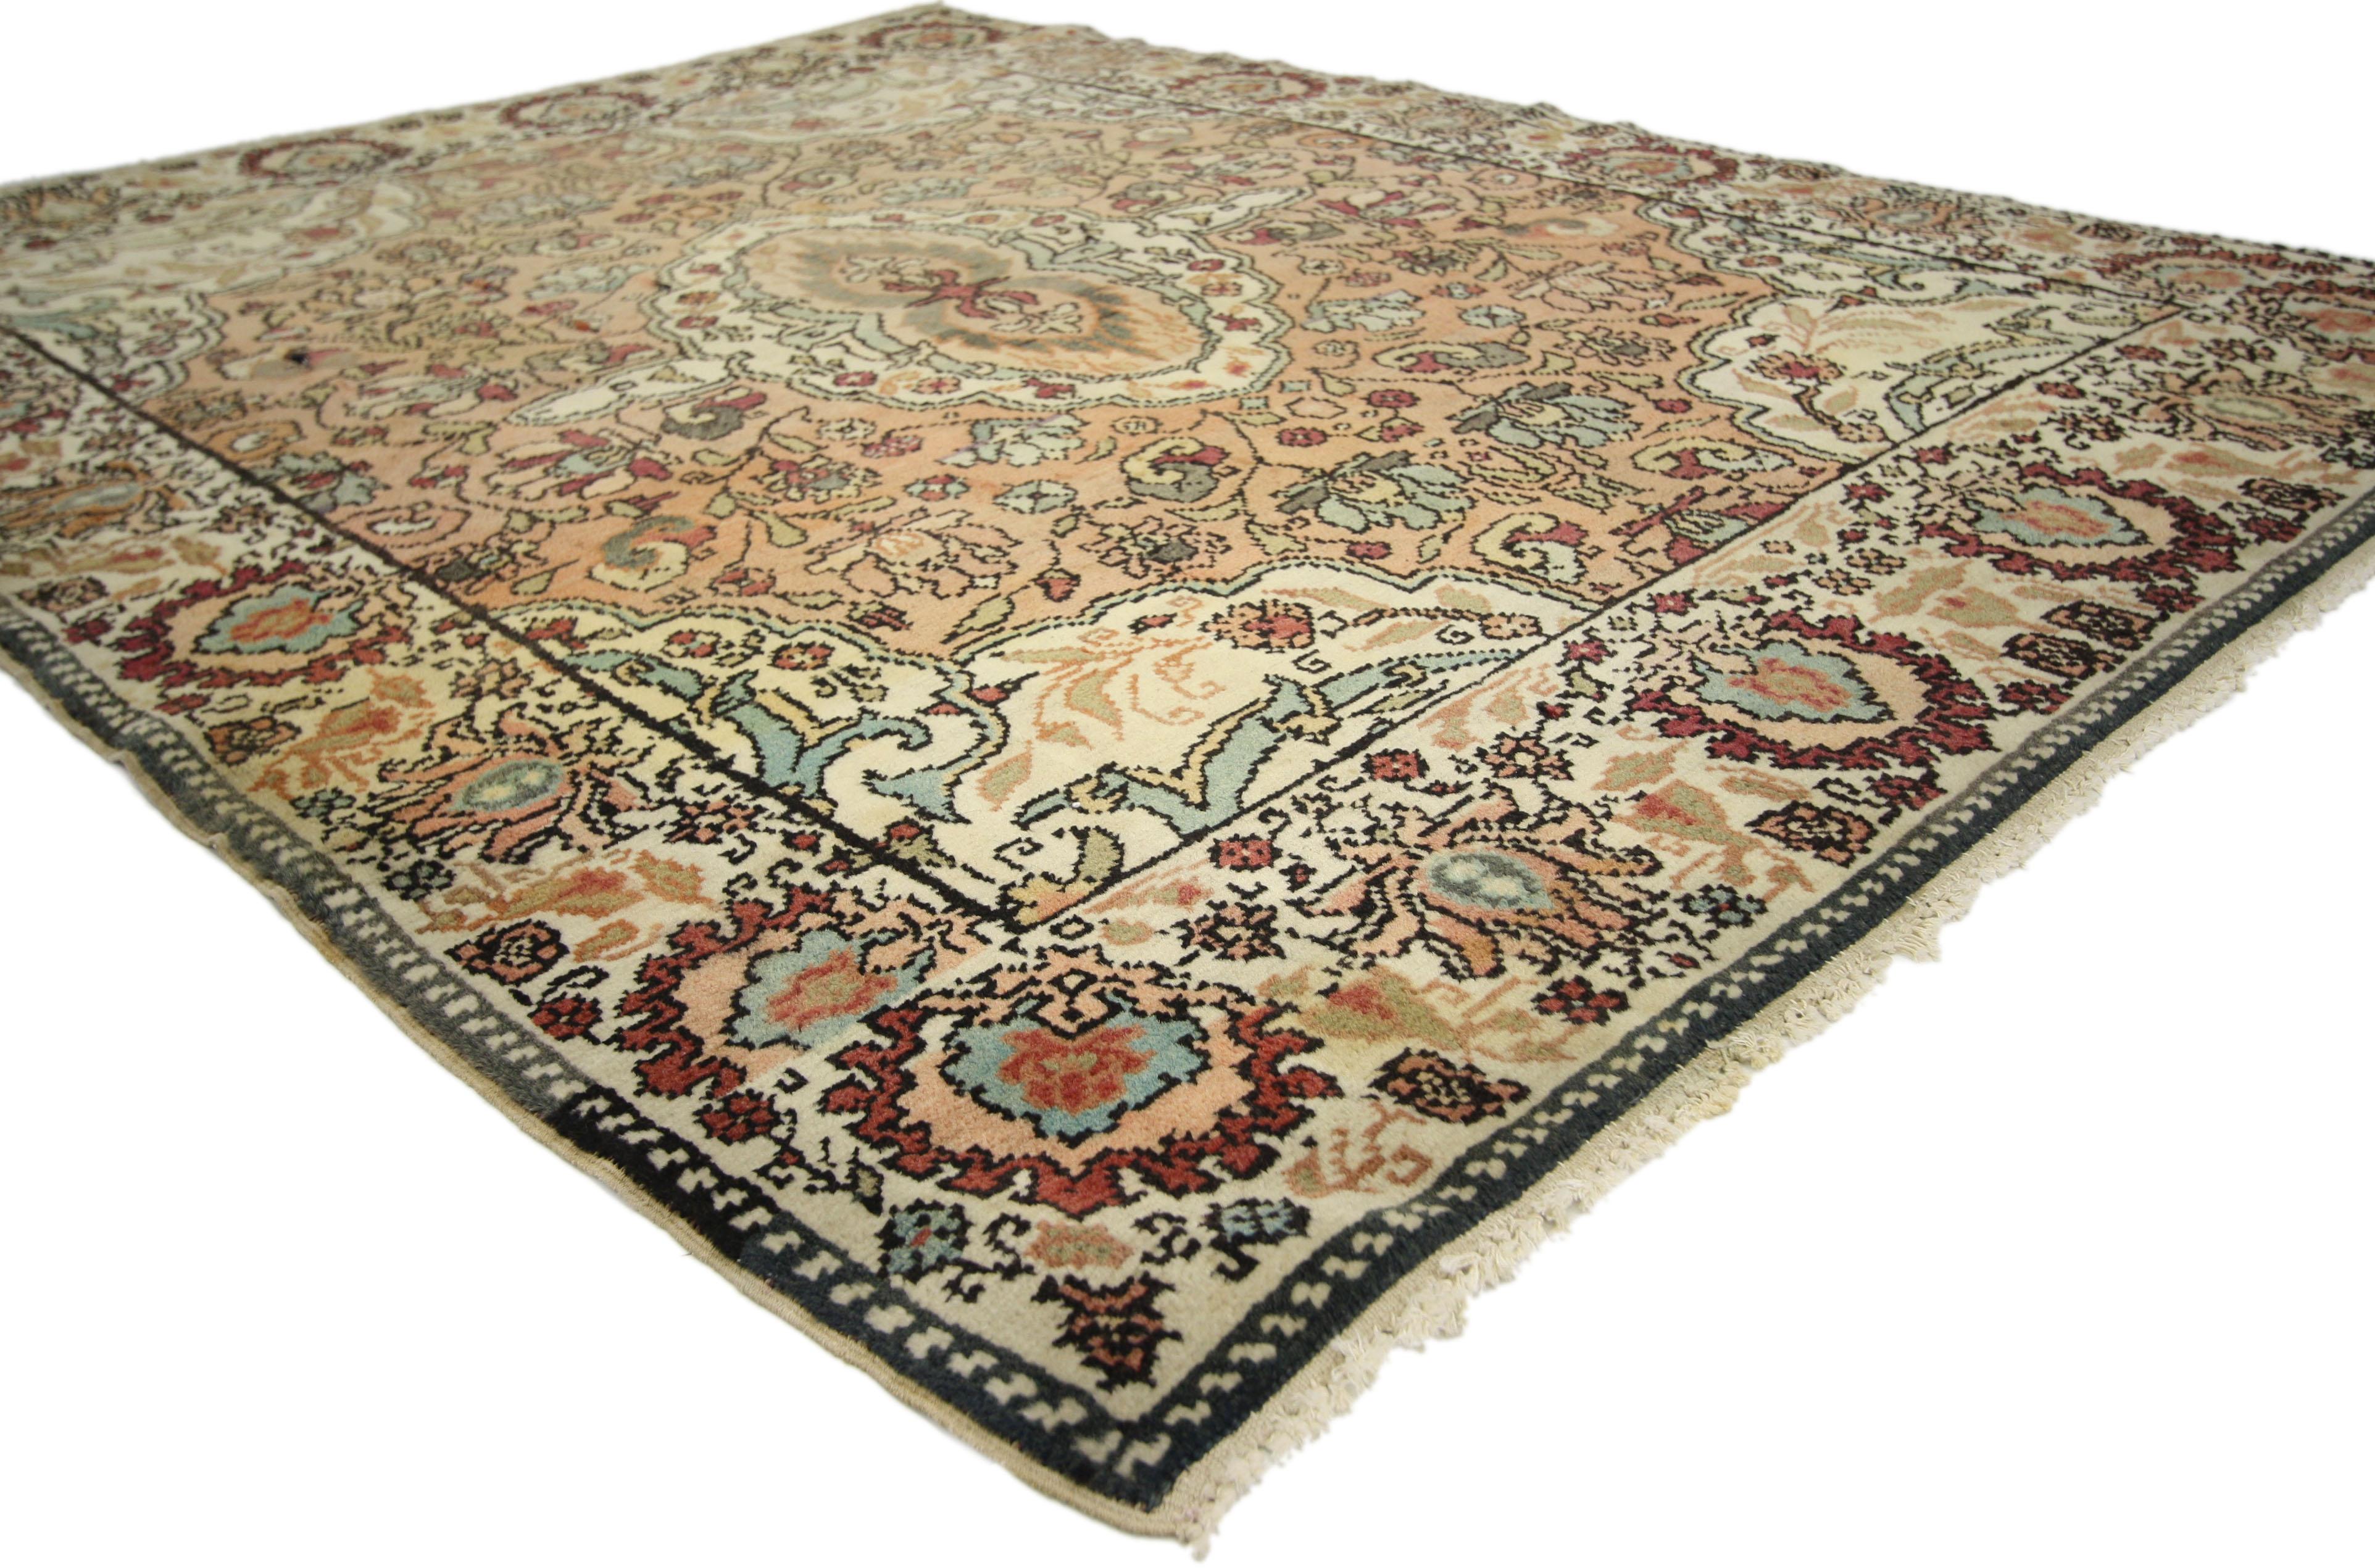 74659 vintage Indian Agra rug, Foyer or Entry rug. This hand knotted wool vintage Indian Agra accent rug features a cusped oval central medallion surrounded by an all-over floral pattern composed of blooming palmettes, leafy tendrils, organic